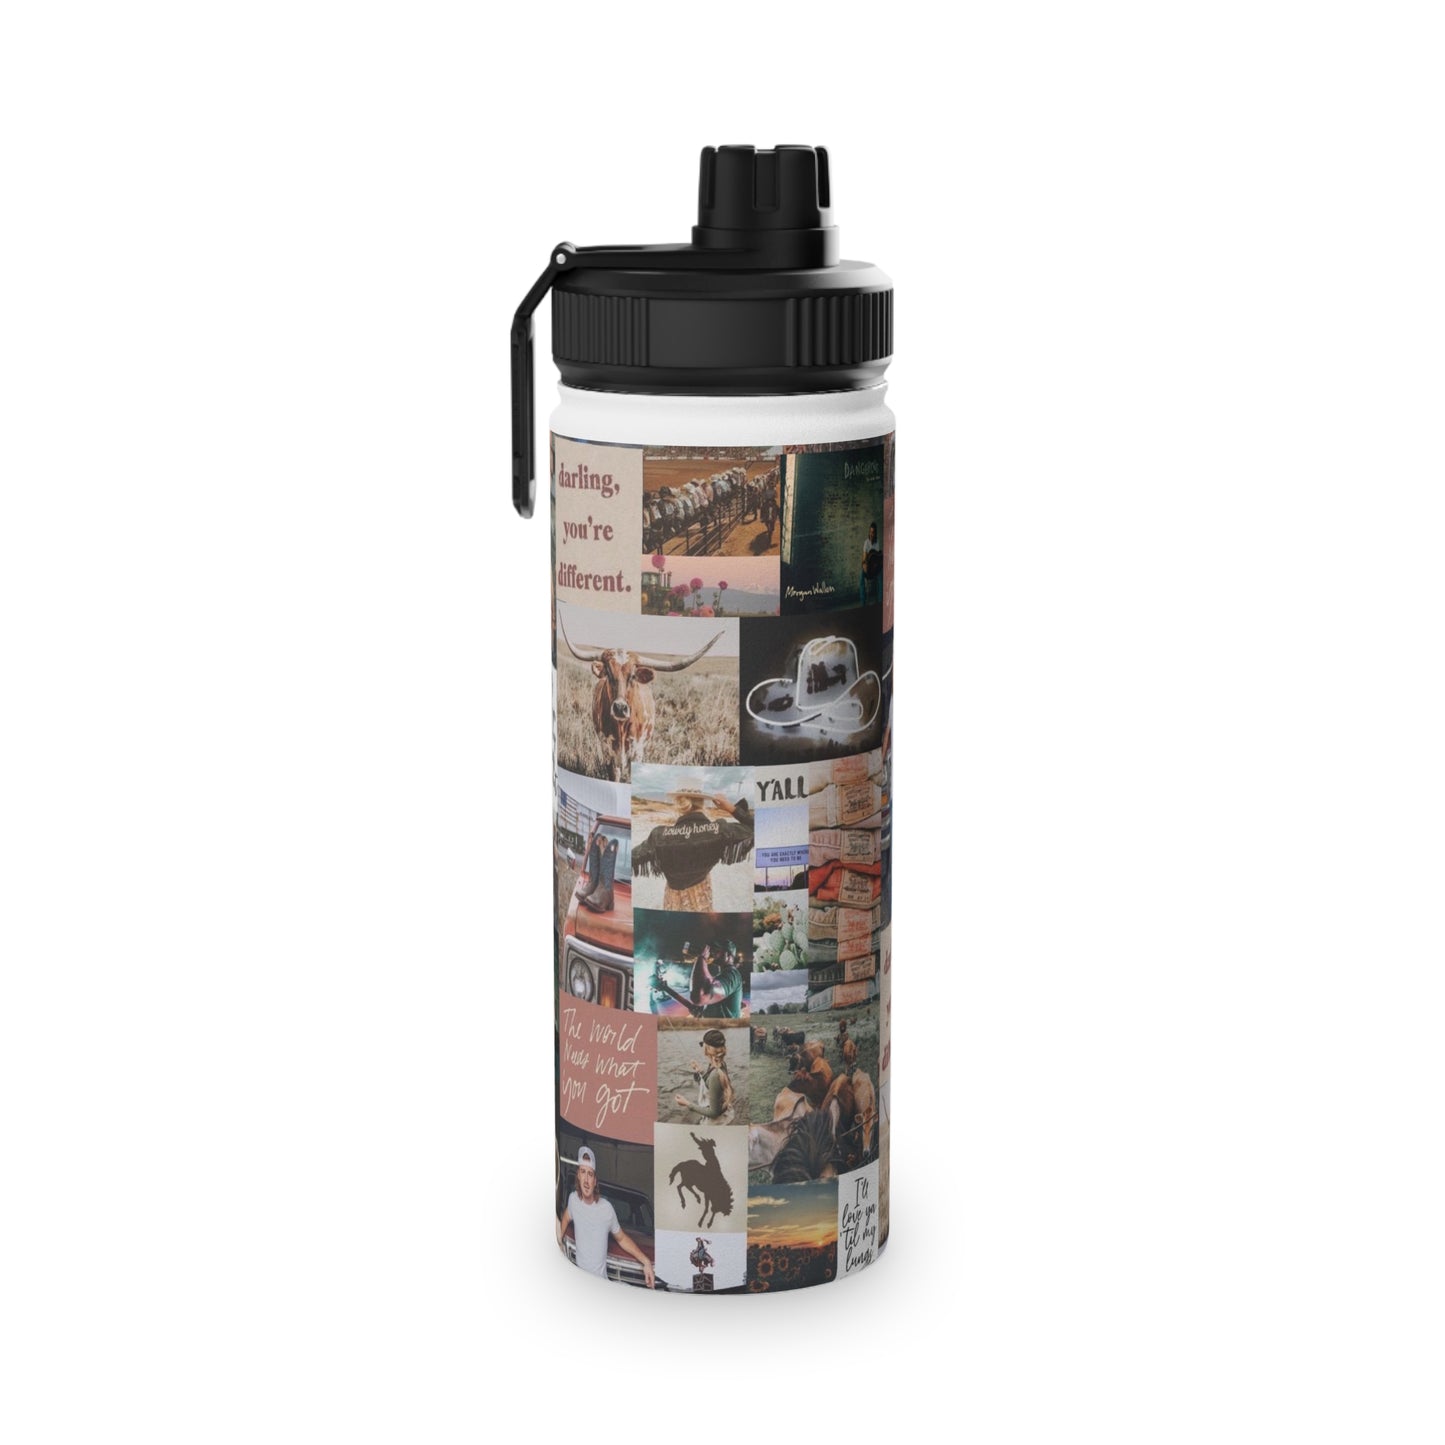 Morgan Wallen Darling You're Different Collage Stainless Steel Sports Lid Water Bottle